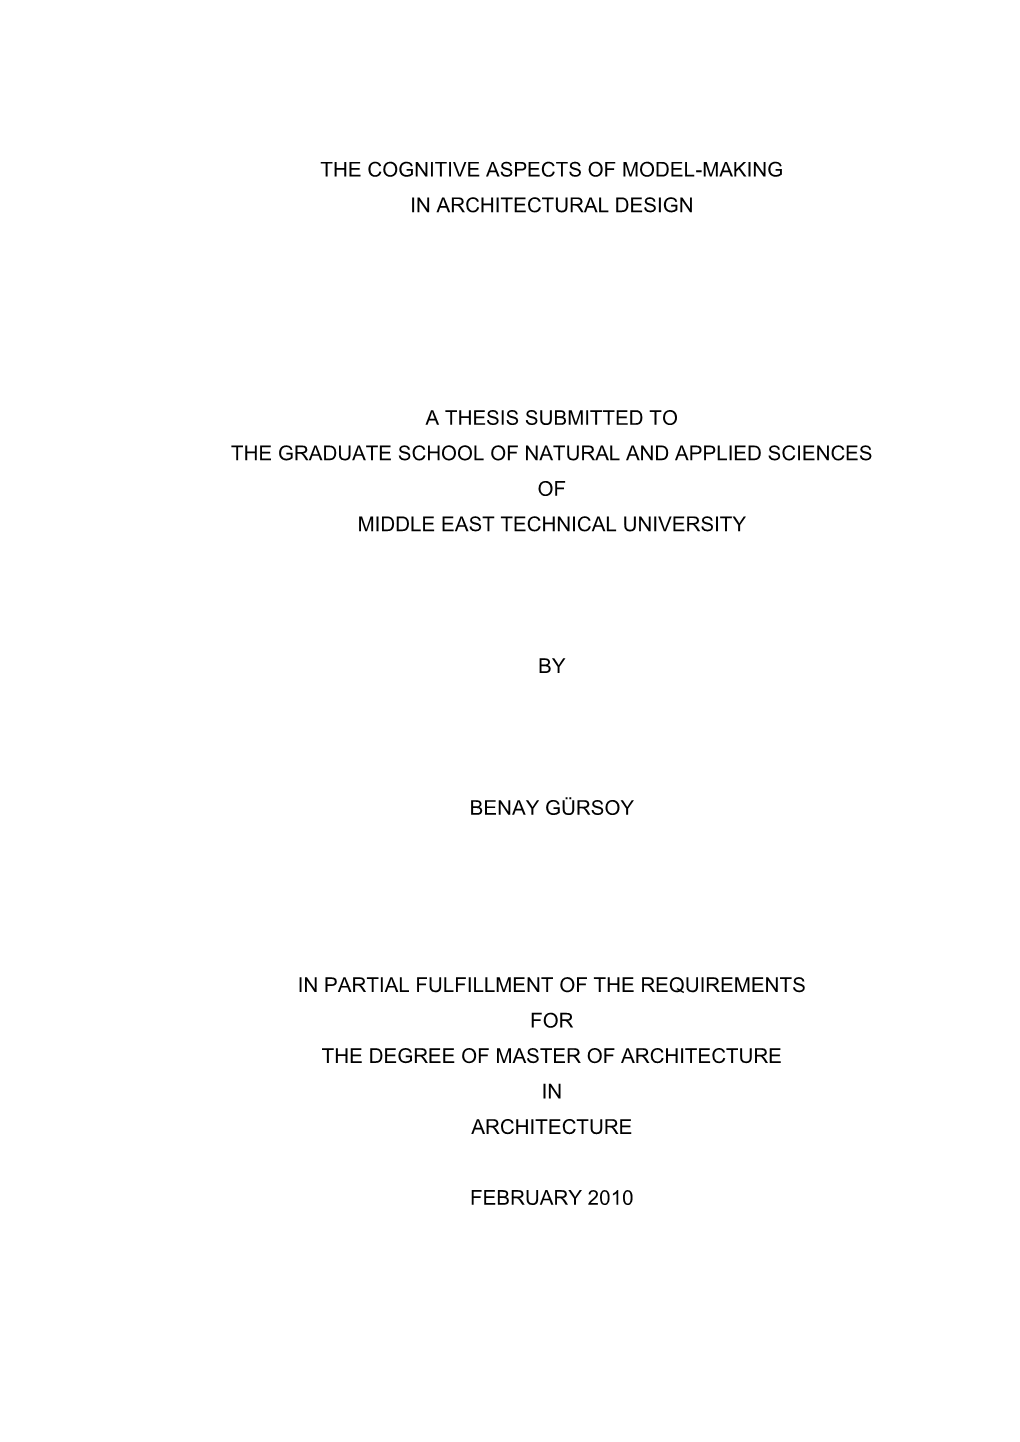 The Cognitive Aspects of Model-Making in Architectural Design a Thesis Submitted to the Graduate School of Natural and Applied